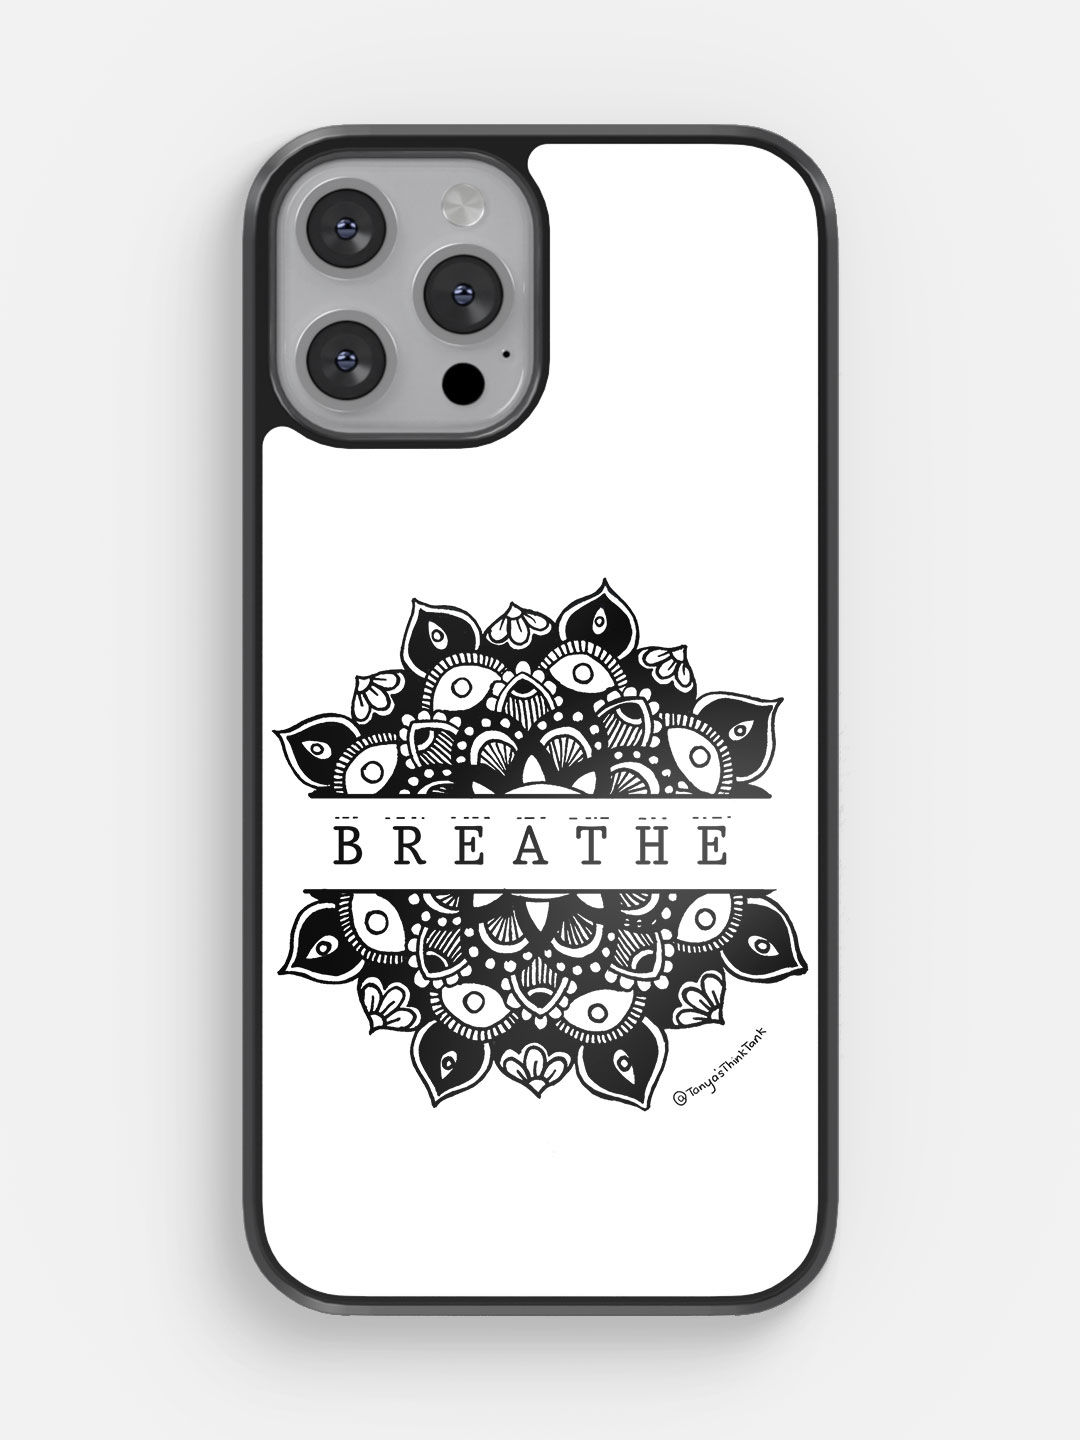 Buy Breathe - Bumper Phone Case for iPhone 12 Pro Max Phone Cases & Covers Online